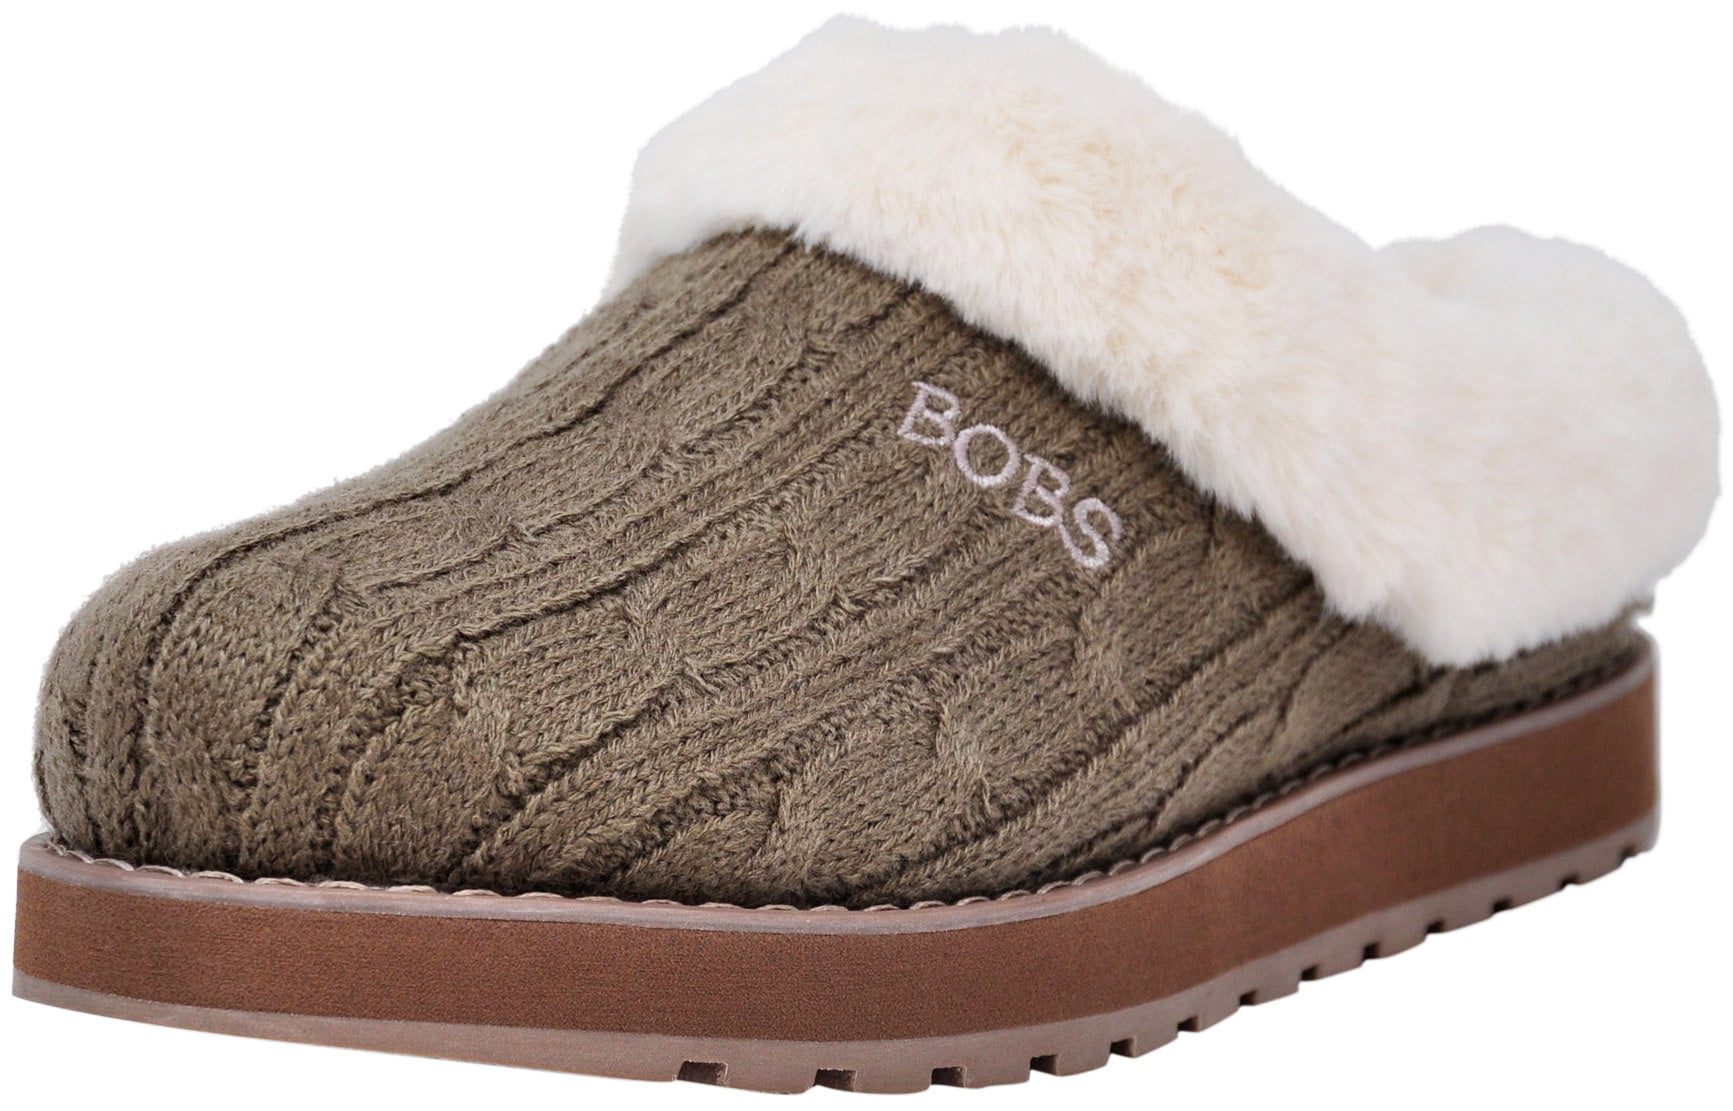 skechers bobs delight fall sweater clogs